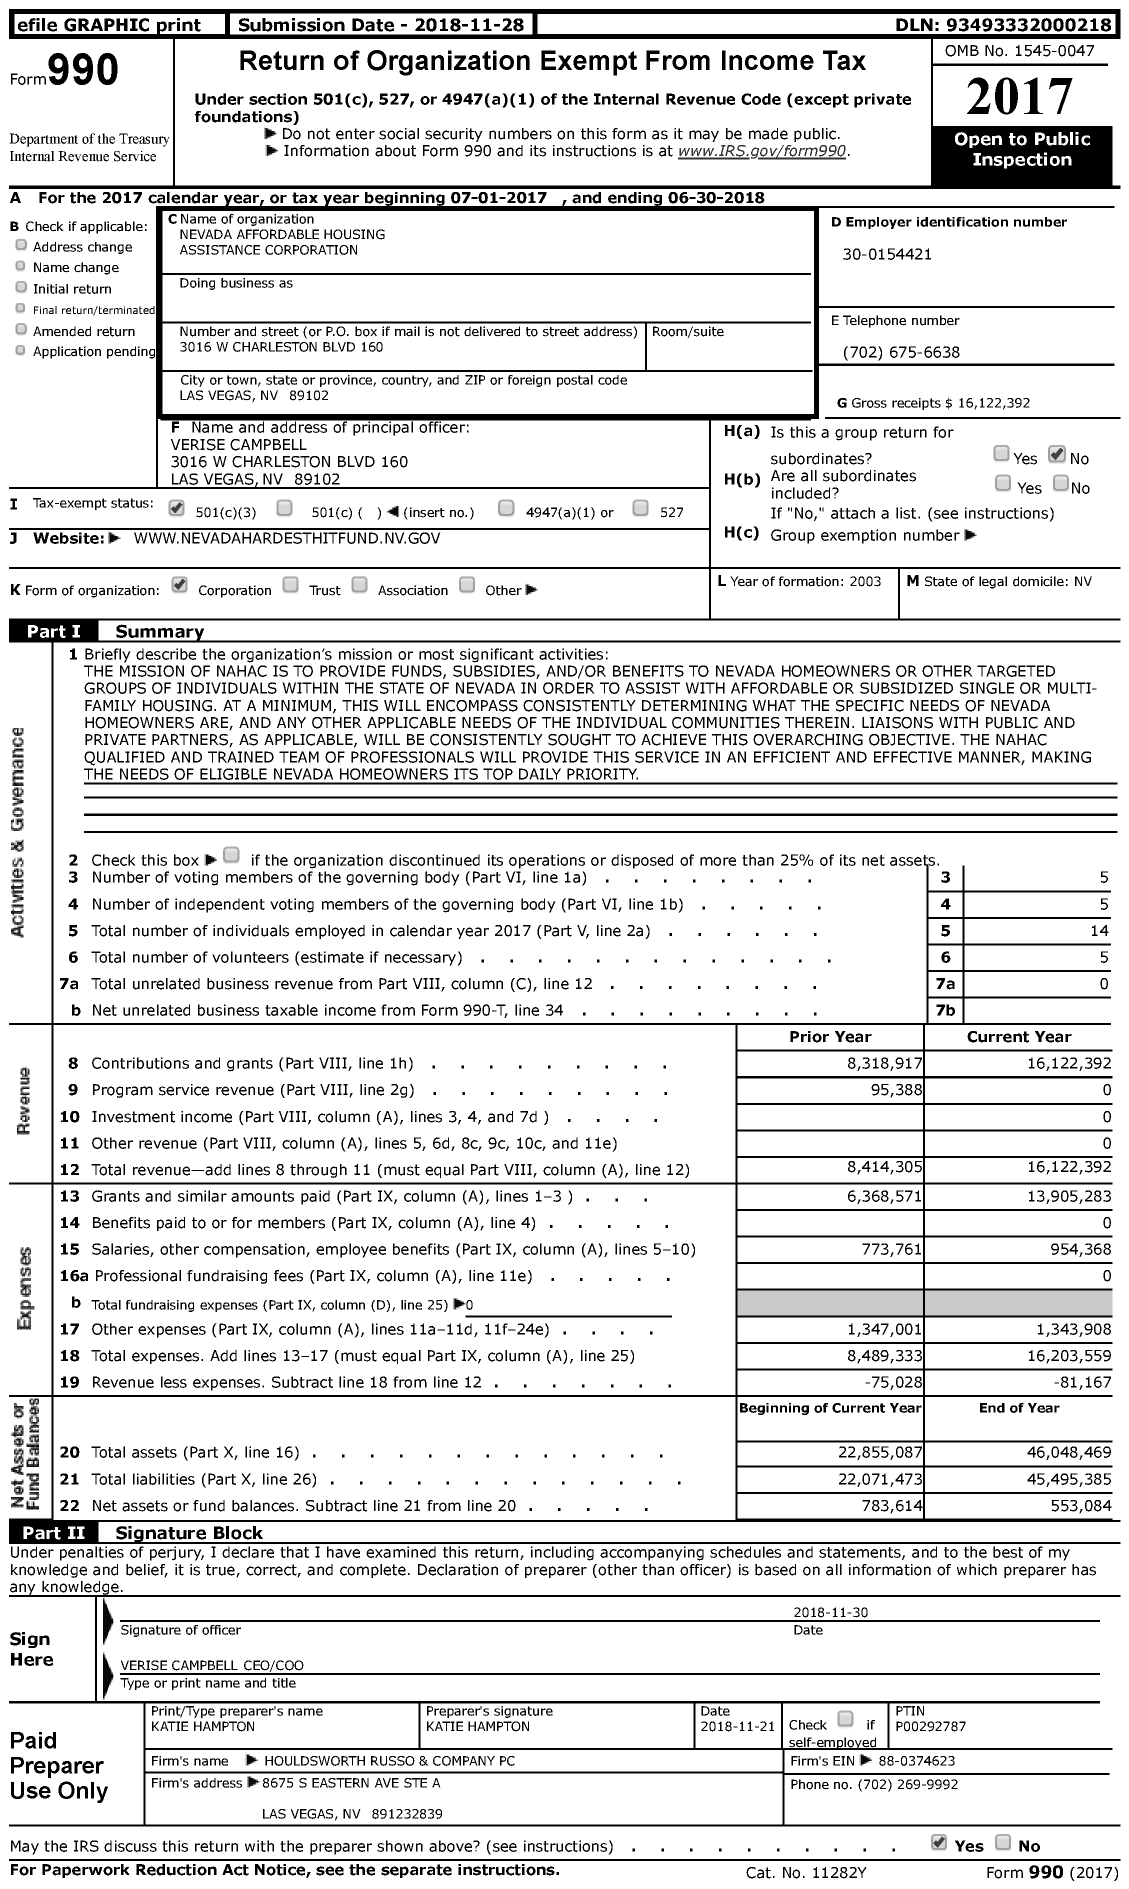 Image of first page of 2017 Form 990 for Nevada Affordable Housing Assistance Corporation (NAHAC)